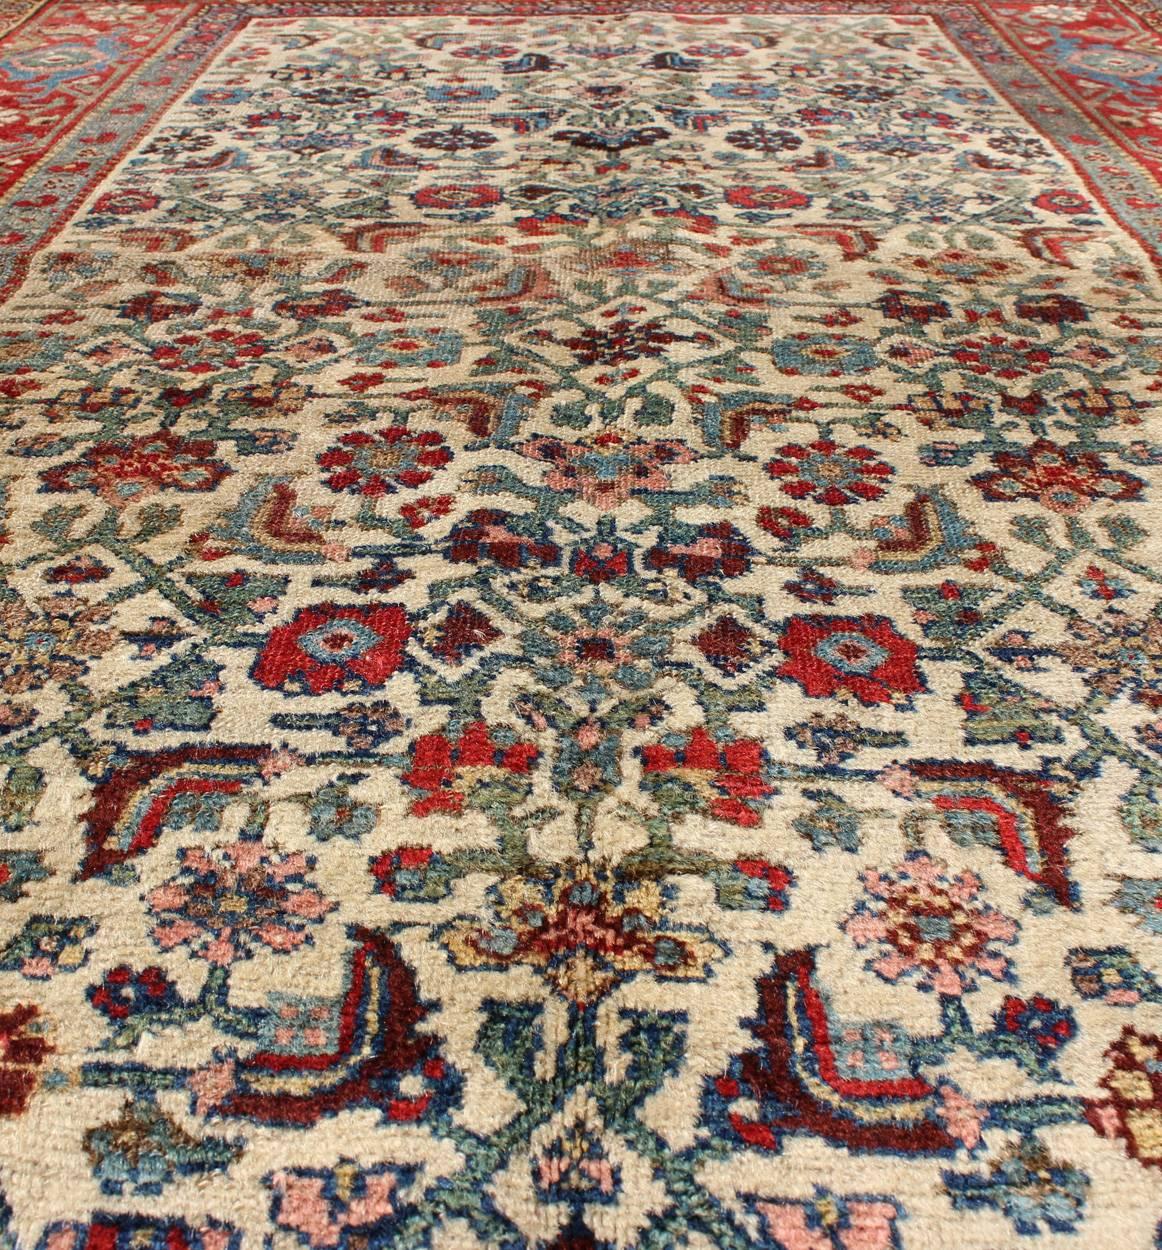 Early 20th Century Antique Persian Bidjar Carpet with Ivory, Rose, Green, Blue and Aubergine For Sale